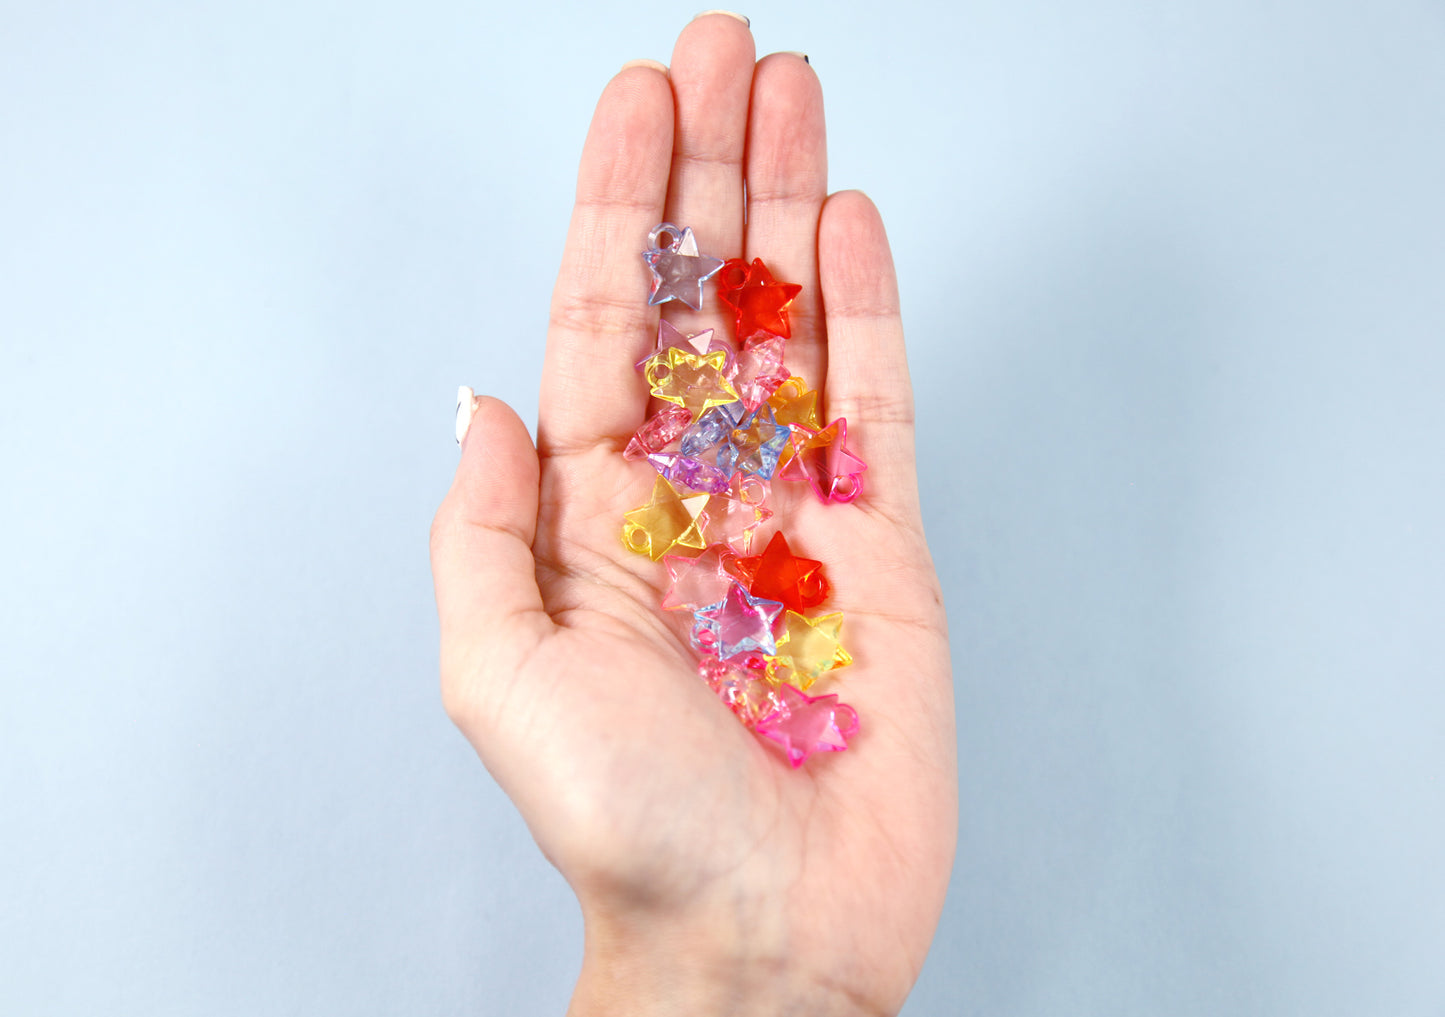 Plastic Star Charms - 17mm Small Sparkly Transparent Faceted Star Charm Plastic or Acrylic Charms or Pendants - 100 pc set